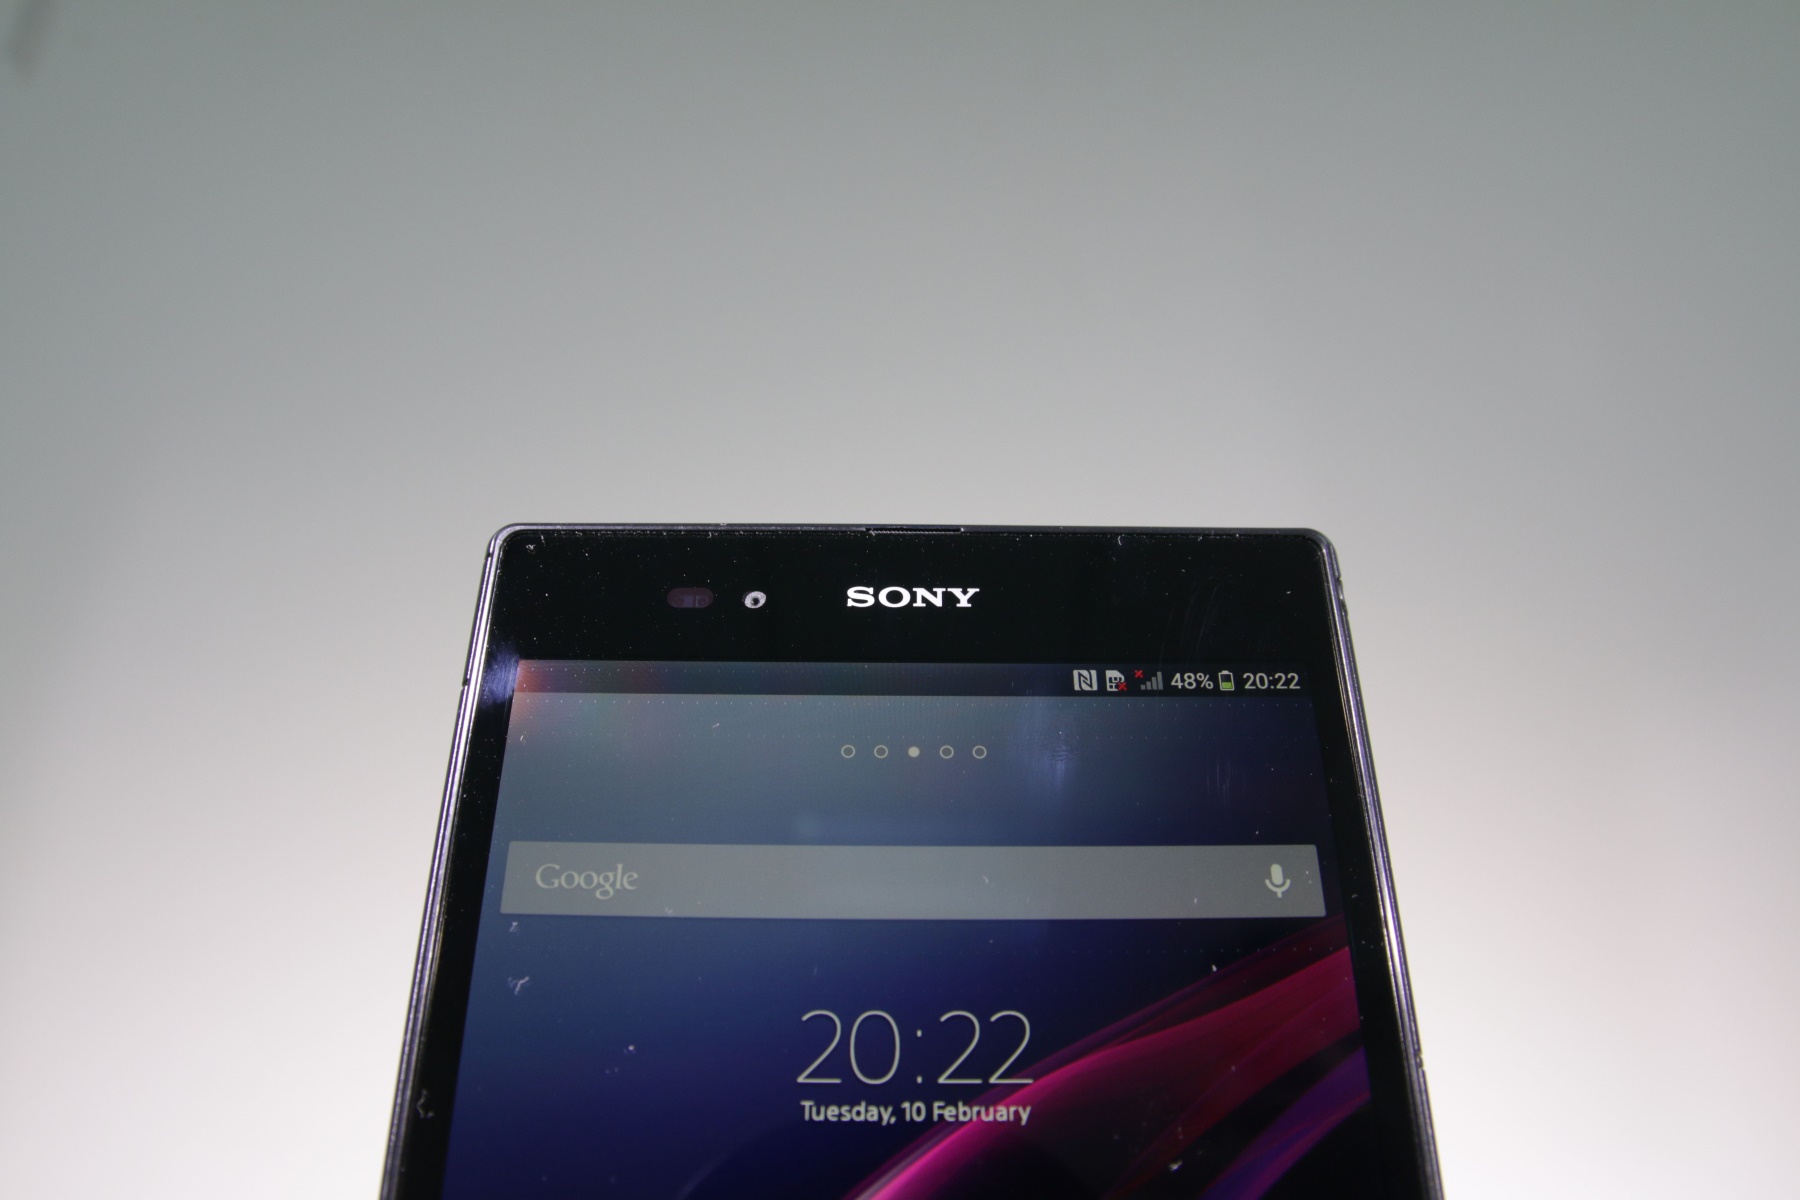 Sony Xperia Z Ultra Rooting: Enhancing Performance